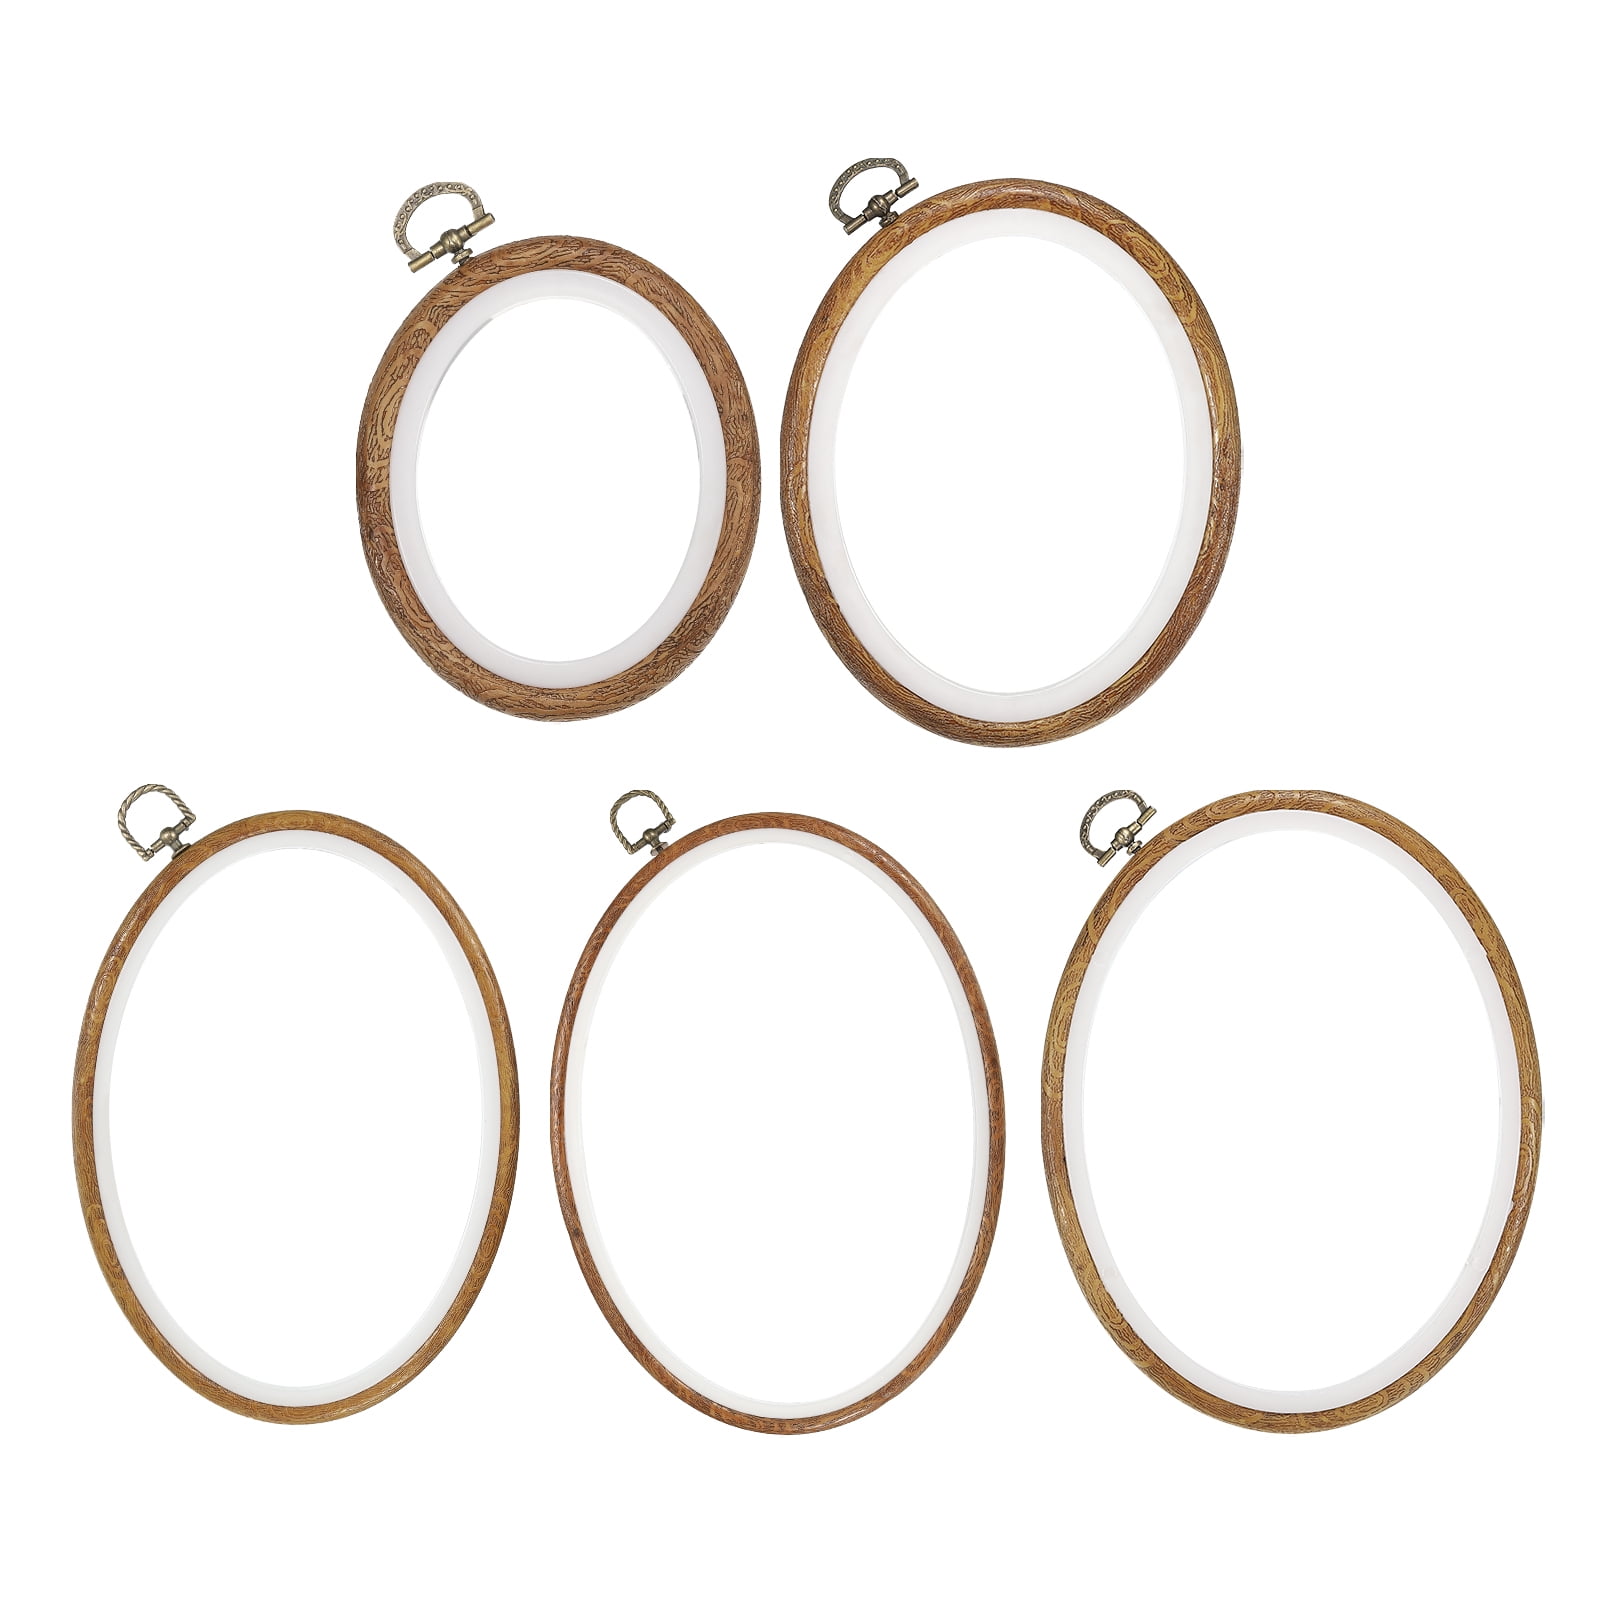 5 Pieces Oval Embroidery Hoops Imitated Wood Cross Stitch Hoop Frame Display Ring Set for Embroidery Art Craft Handy Sewing Decor (5 Sizes) 